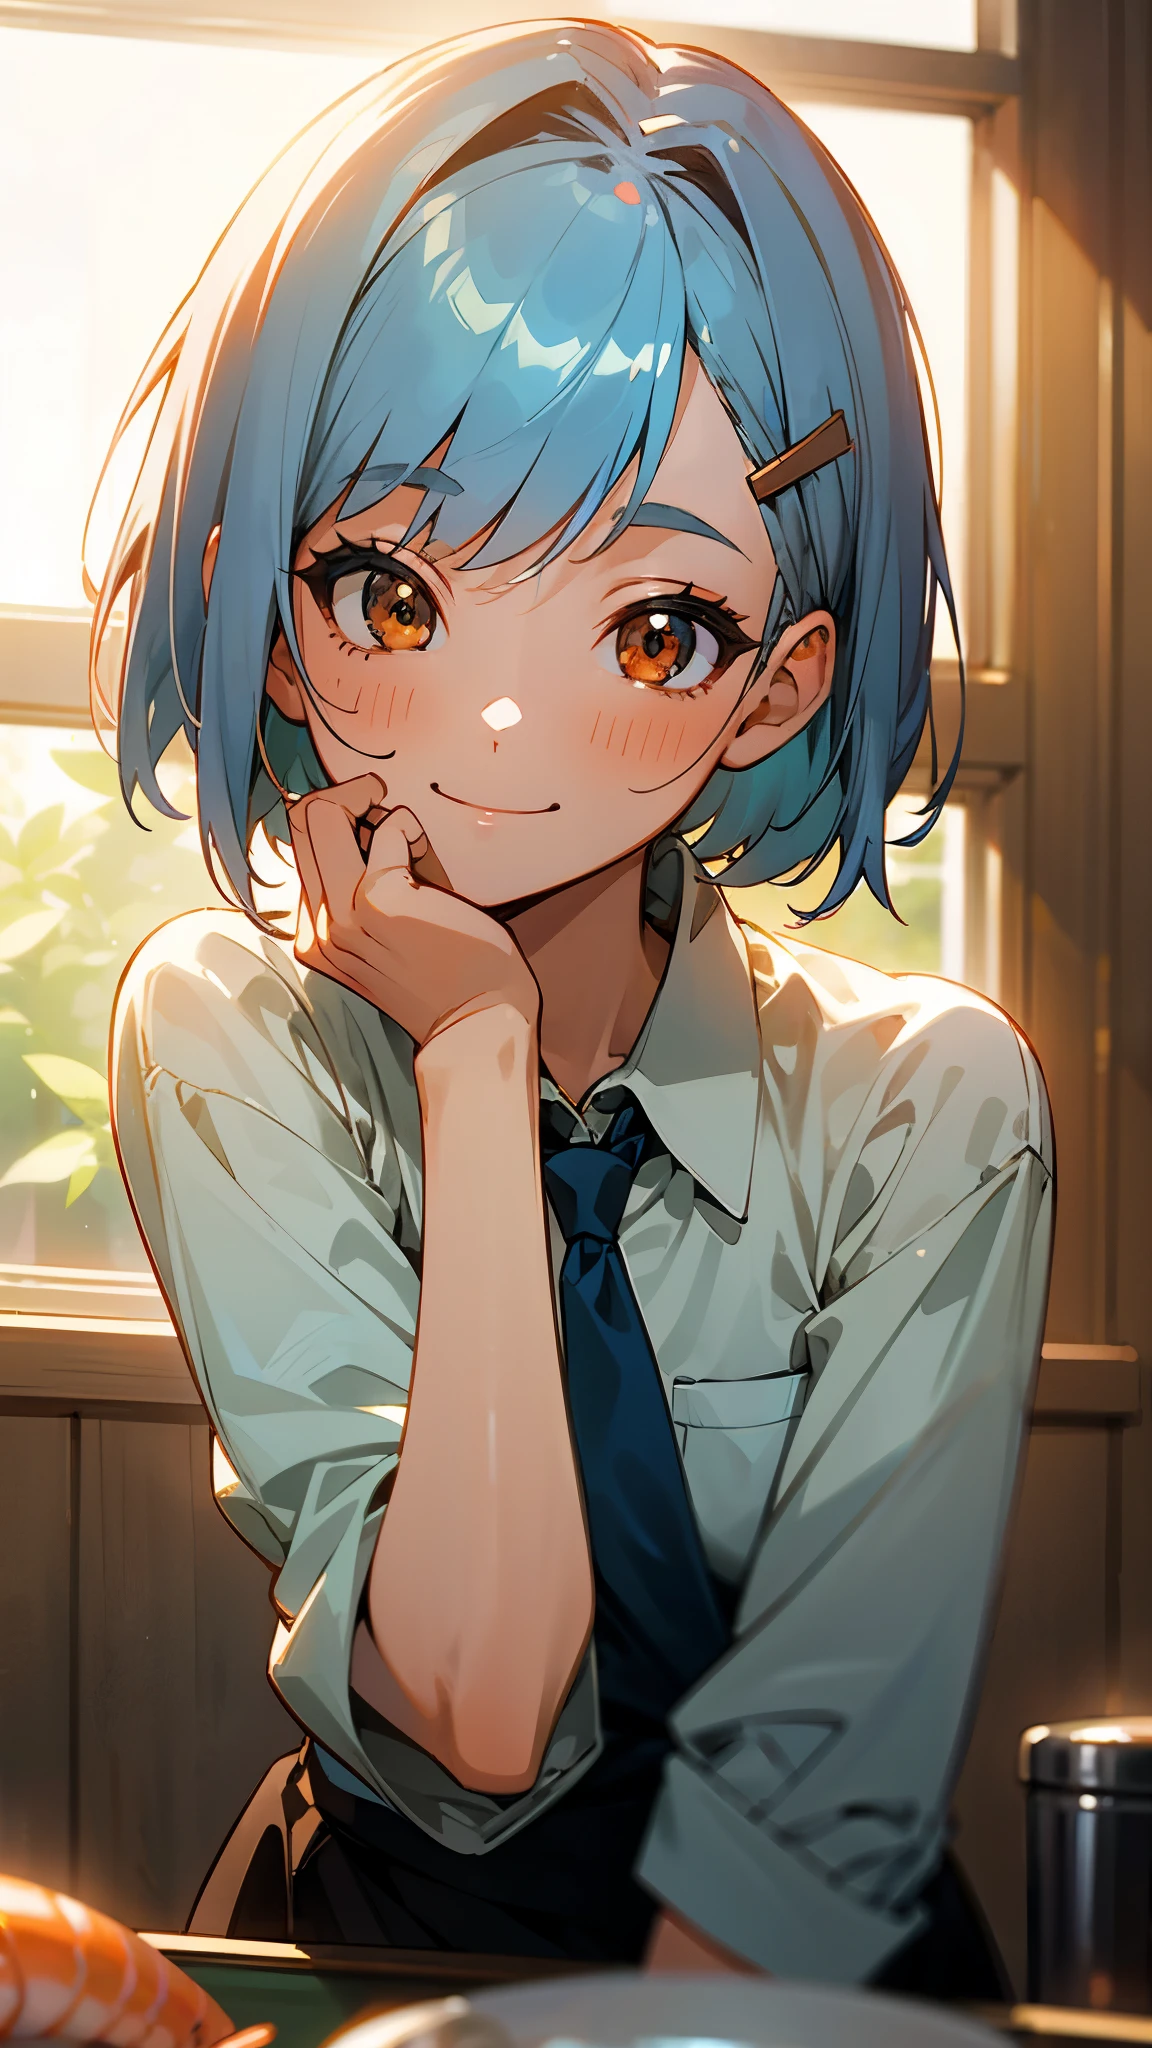 1 girl、Anime Images、kitchen、Delicious food、shrimp、Shiny light blue hair、Short Bob Hairstyles、Tie your hair with an orange hair clip、Beautiful brown eyes、Smiling face、Upper body close-up、Sharp contours、Background blur、Written boundary depth